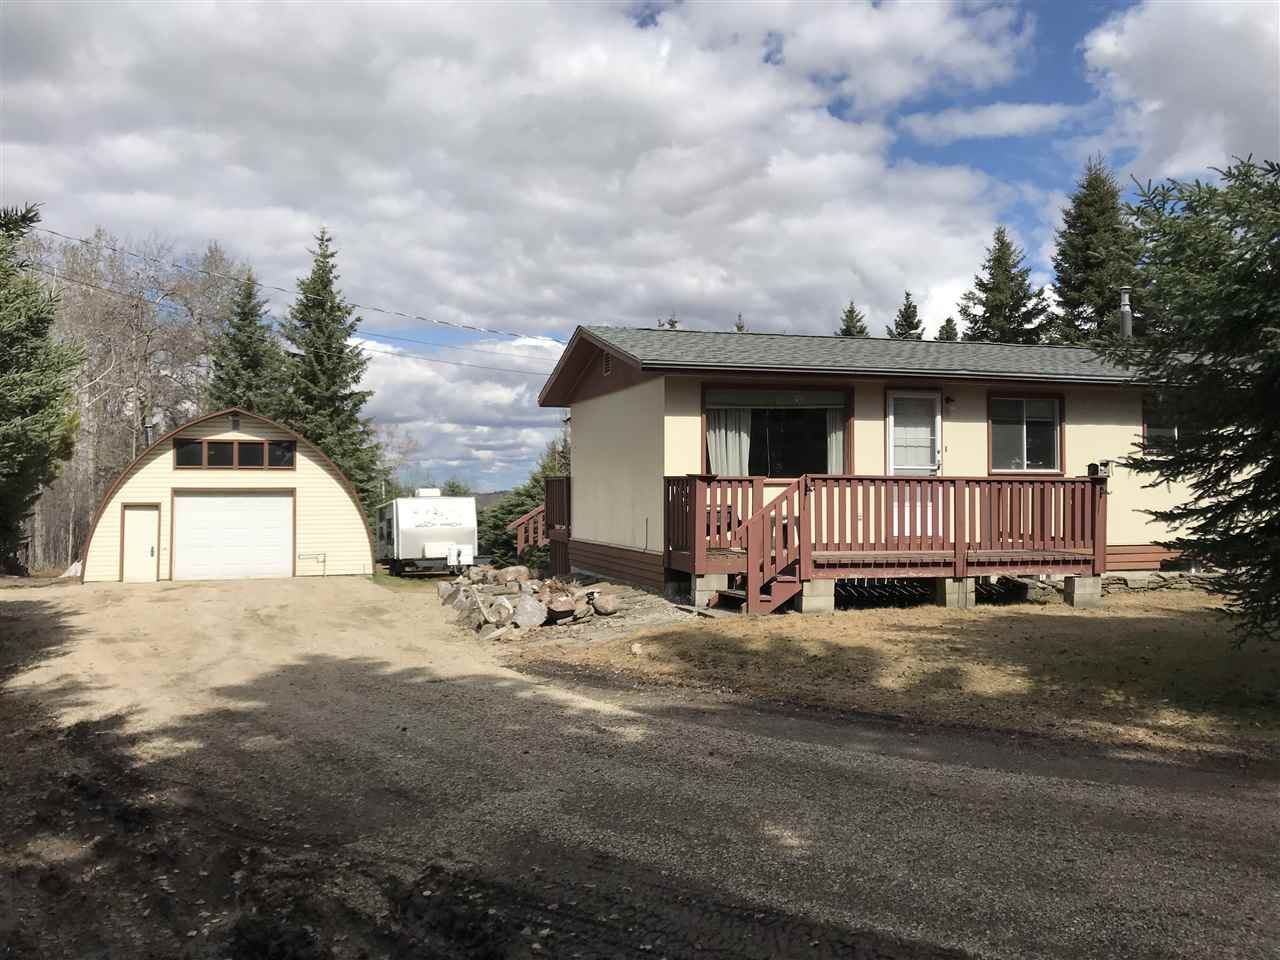 Main Photo: 6138 AIRPORT ROAD in : Fort St. John - Rural E 100th House for sale : MLS®# R2434611